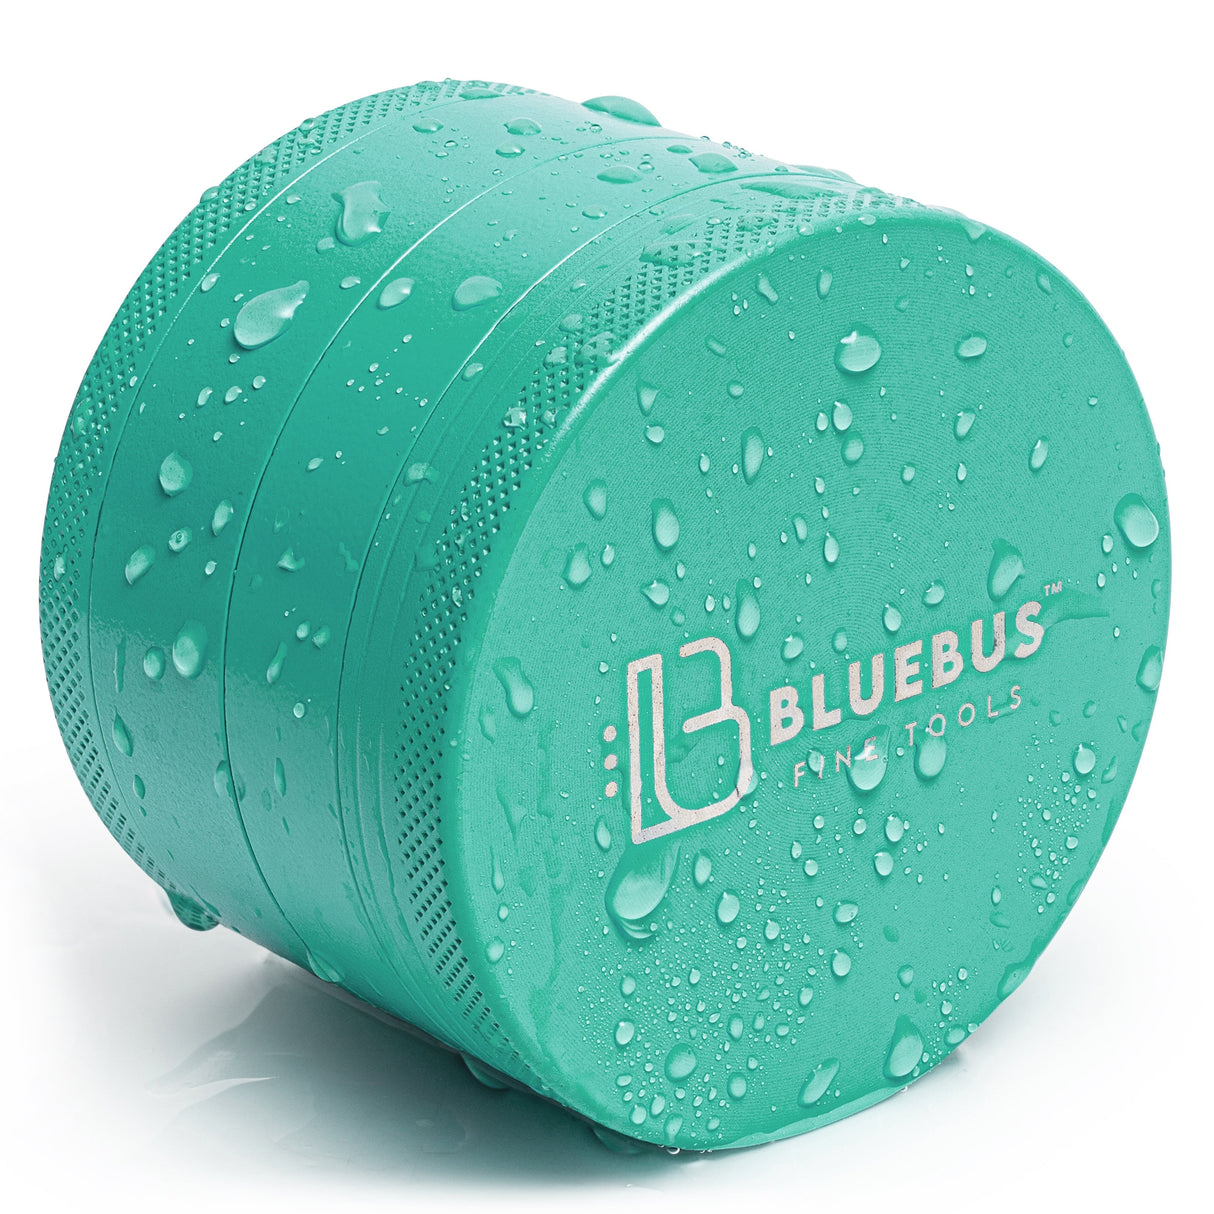 GC 2.5" Teal Ceramic Herb Grinder by Blue Bus Fine Tools with Water Droplets - Side View